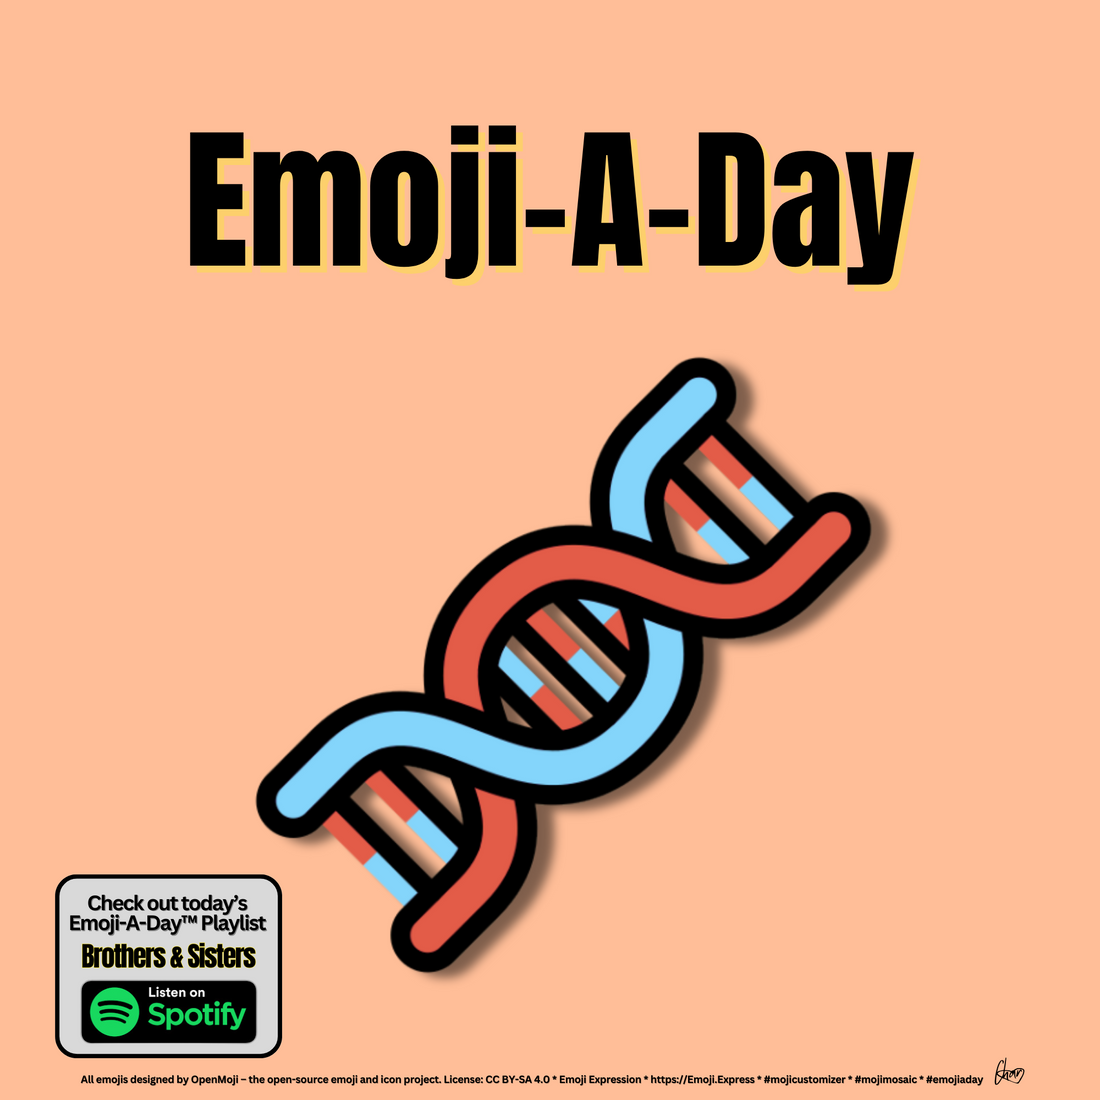 Emoij-A-Day theme with DNA emoji and Brothers and Sisters Spotify Playlist